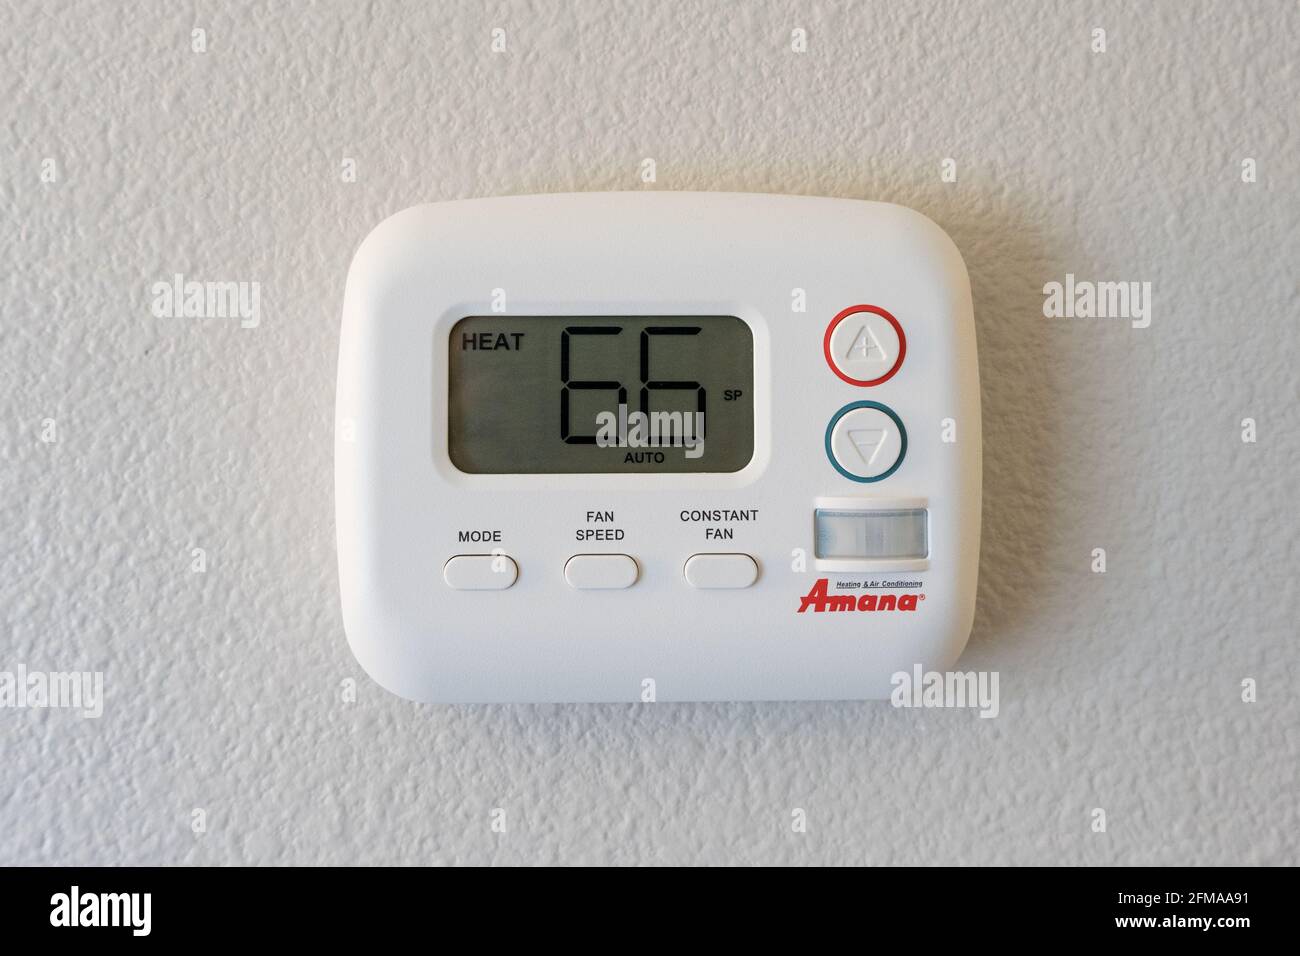 Roanoke, VA - April 25, 2021: Energy saving Amana wall themostat for under the window HVAC system in a hotel. Stock Photo